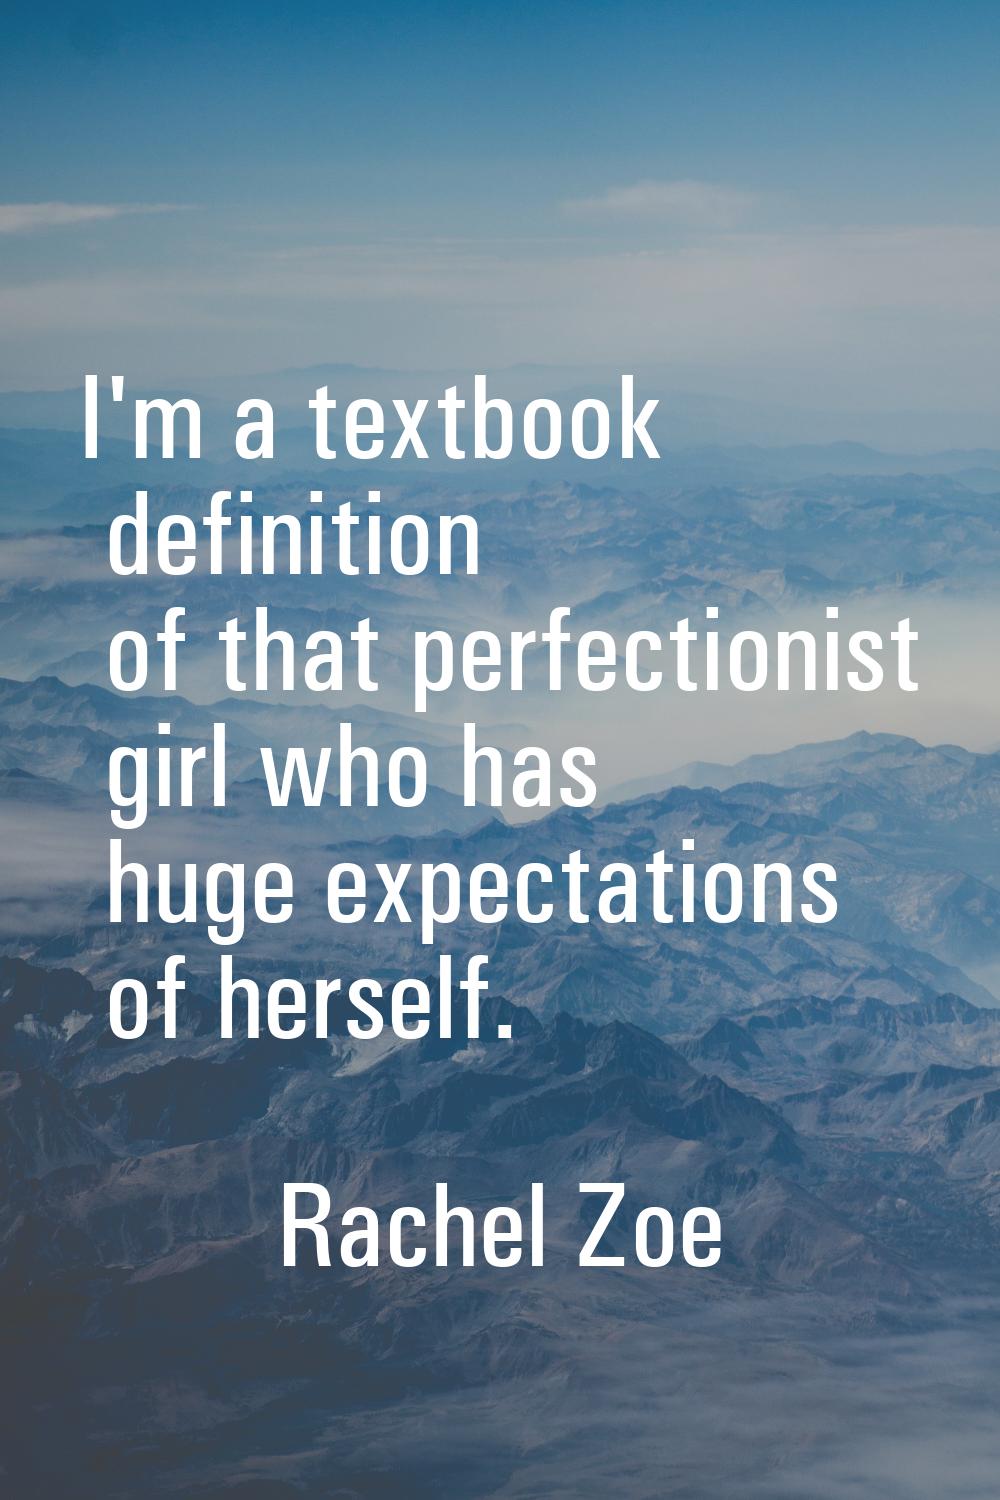 I'm a textbook definition of that perfectionist girl who has huge expectations of herself.